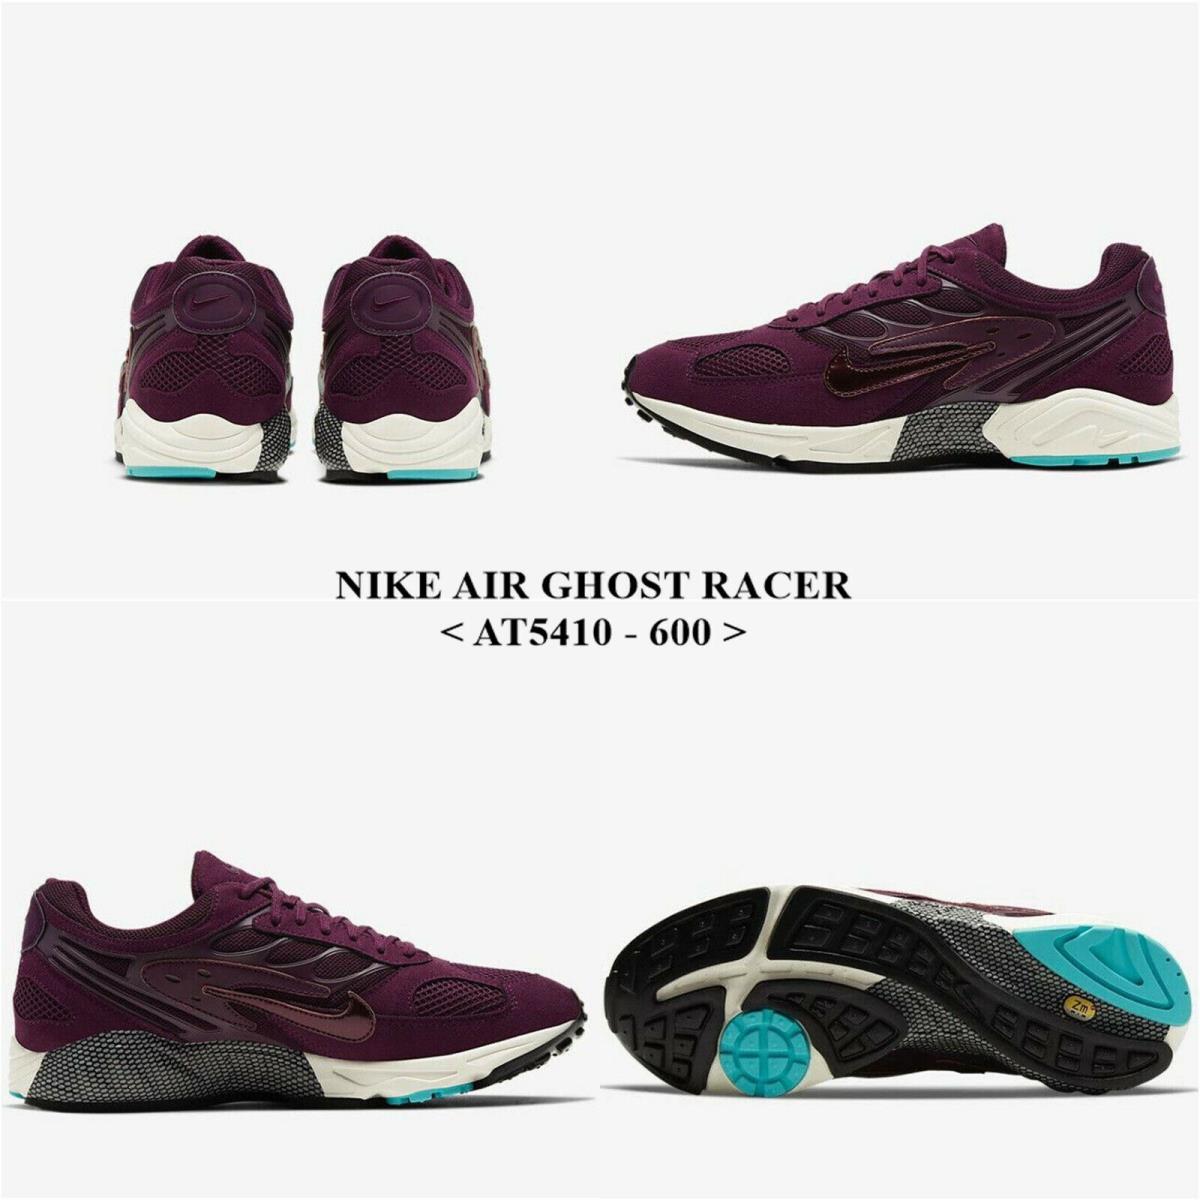 Nike Air Ghost Racer <AT5410 - 600> Men`s Running Shoes.new with Box